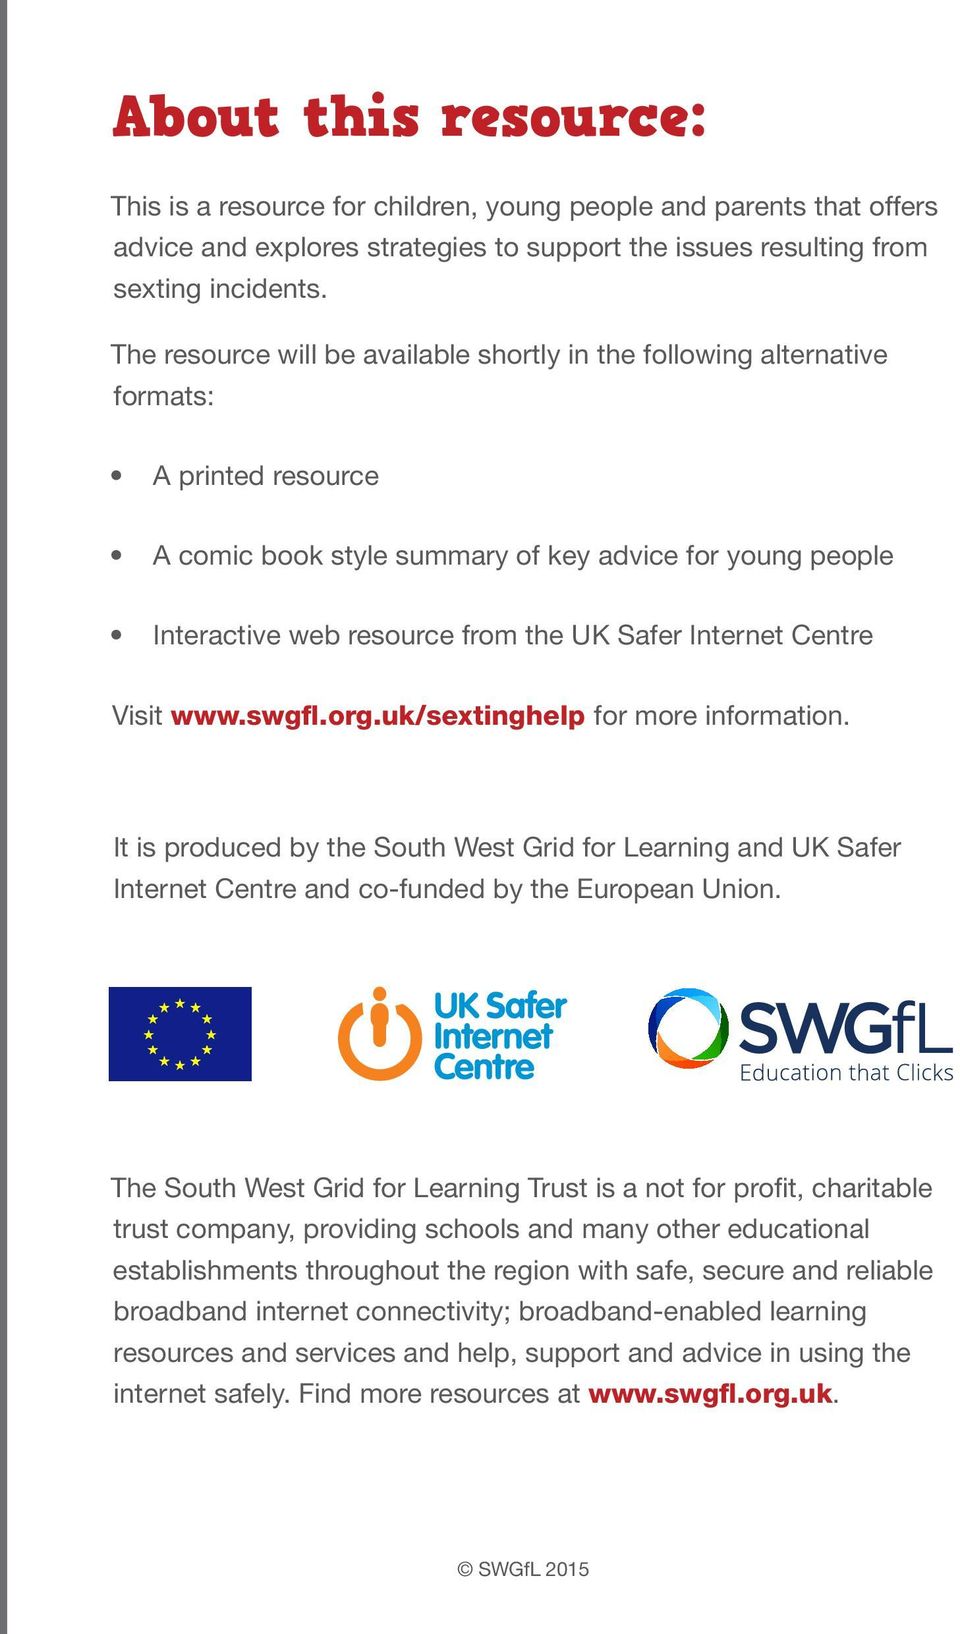 Internet Centre Visit www.swgfl.org.uk/sextinghelp for more information. It is produced by the South West Grid for Learning and UK Safer Internet Centre and co-funded by the European Union.